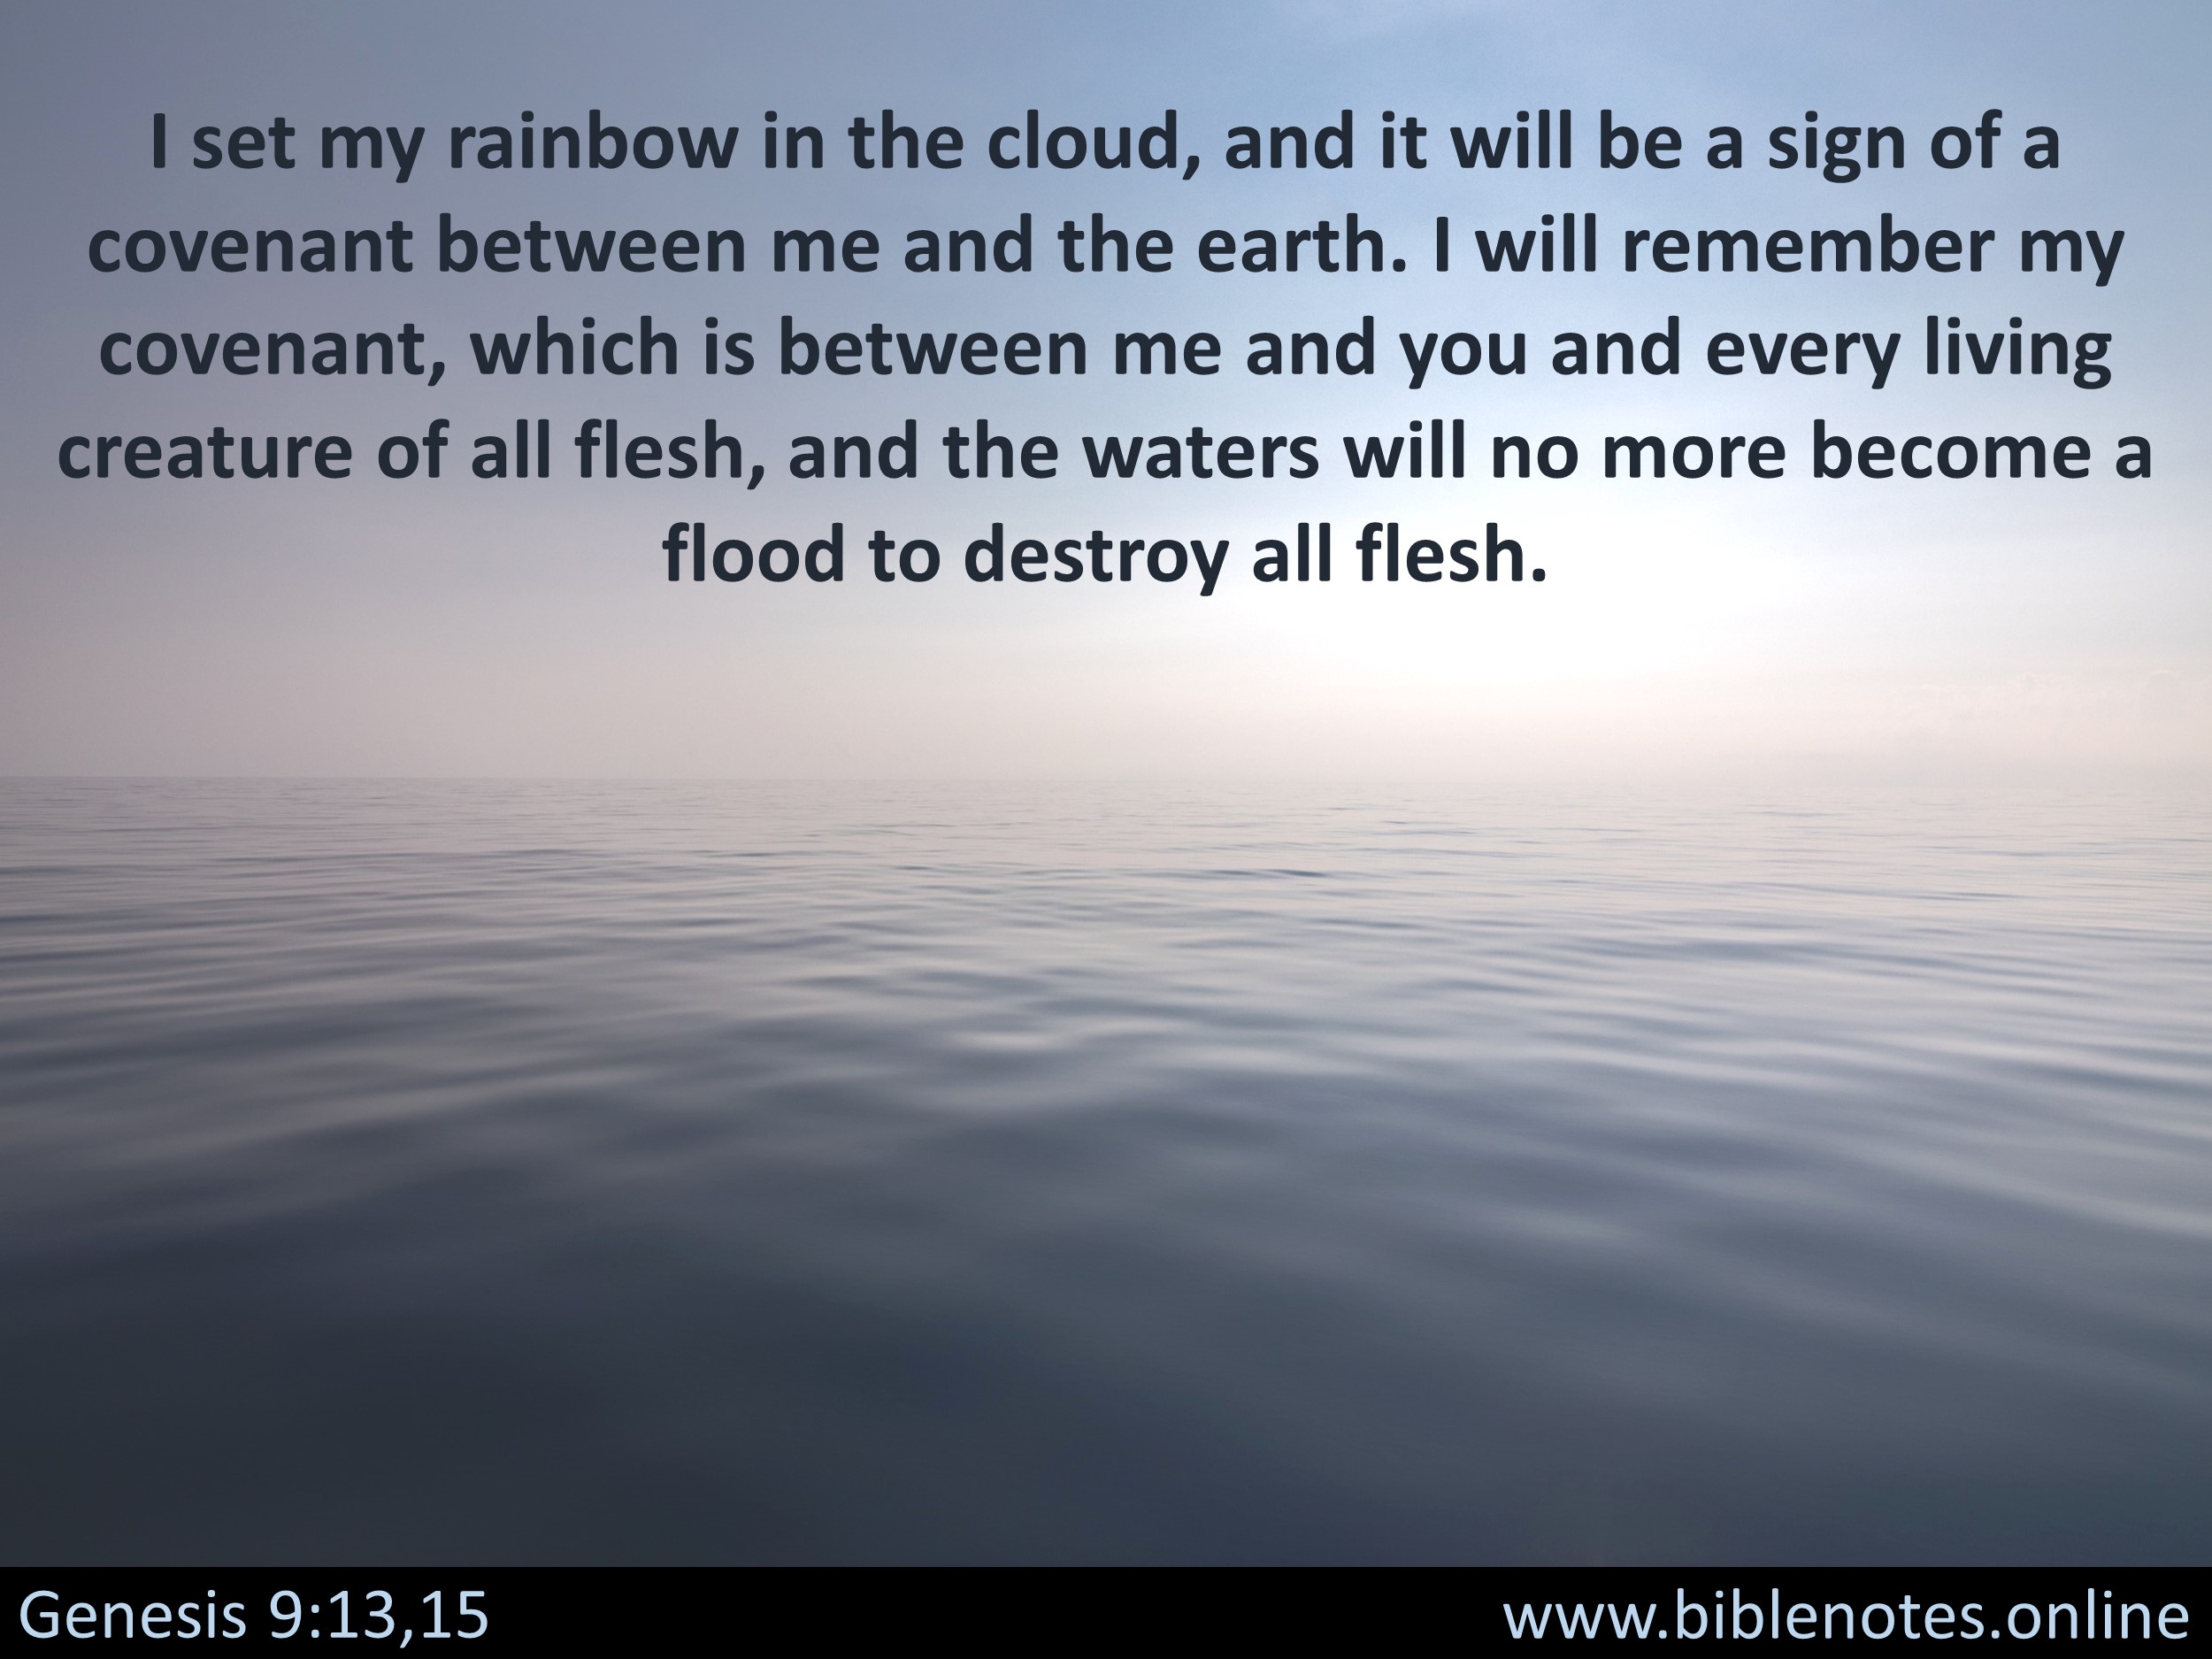 Bible Verse from Genesis Chapter 9